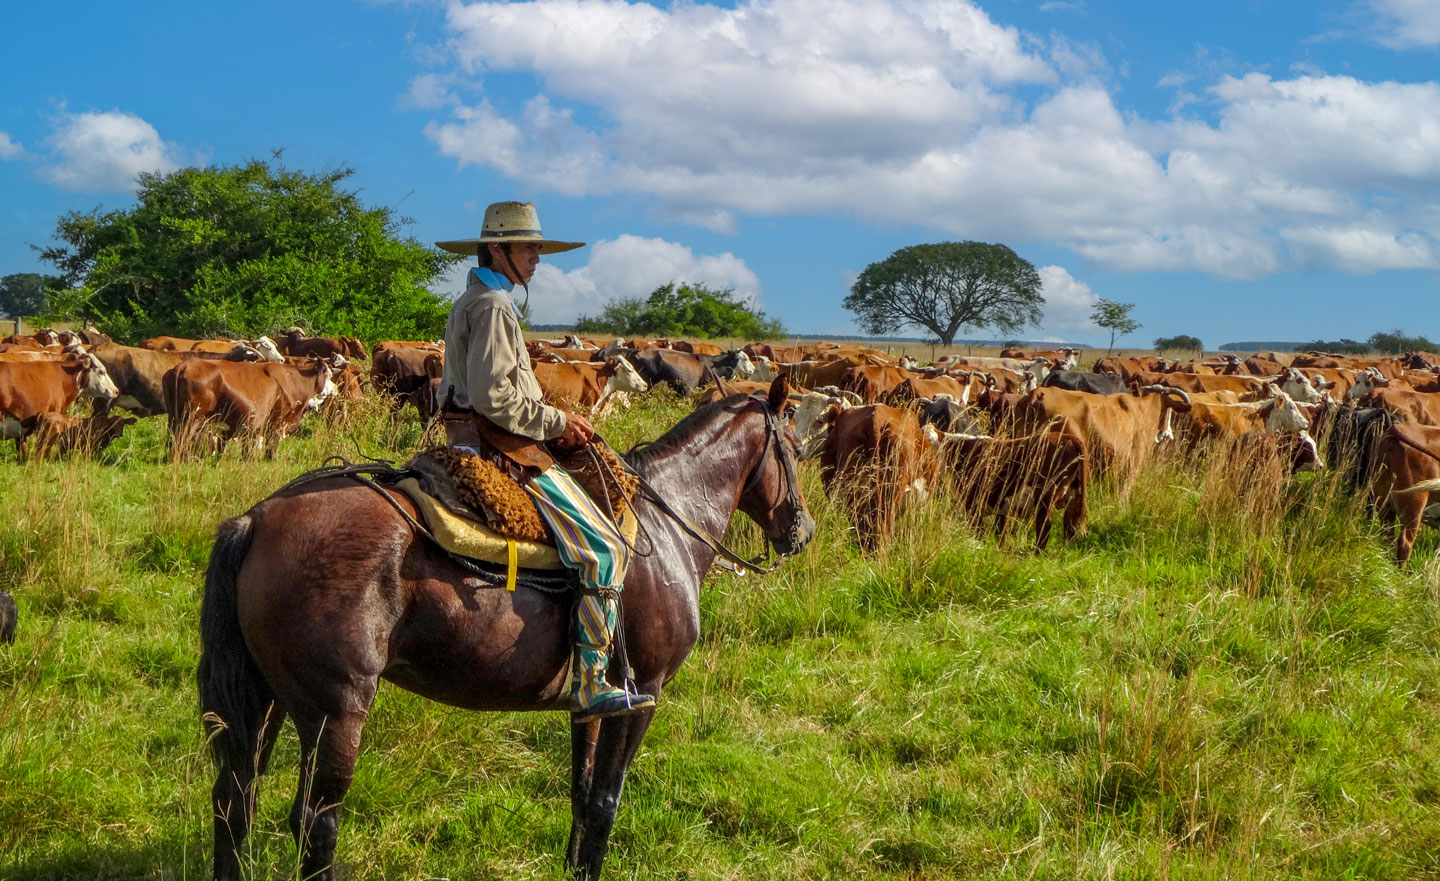 Gaucho with herd of cattle in the grasslands of the vast pampas